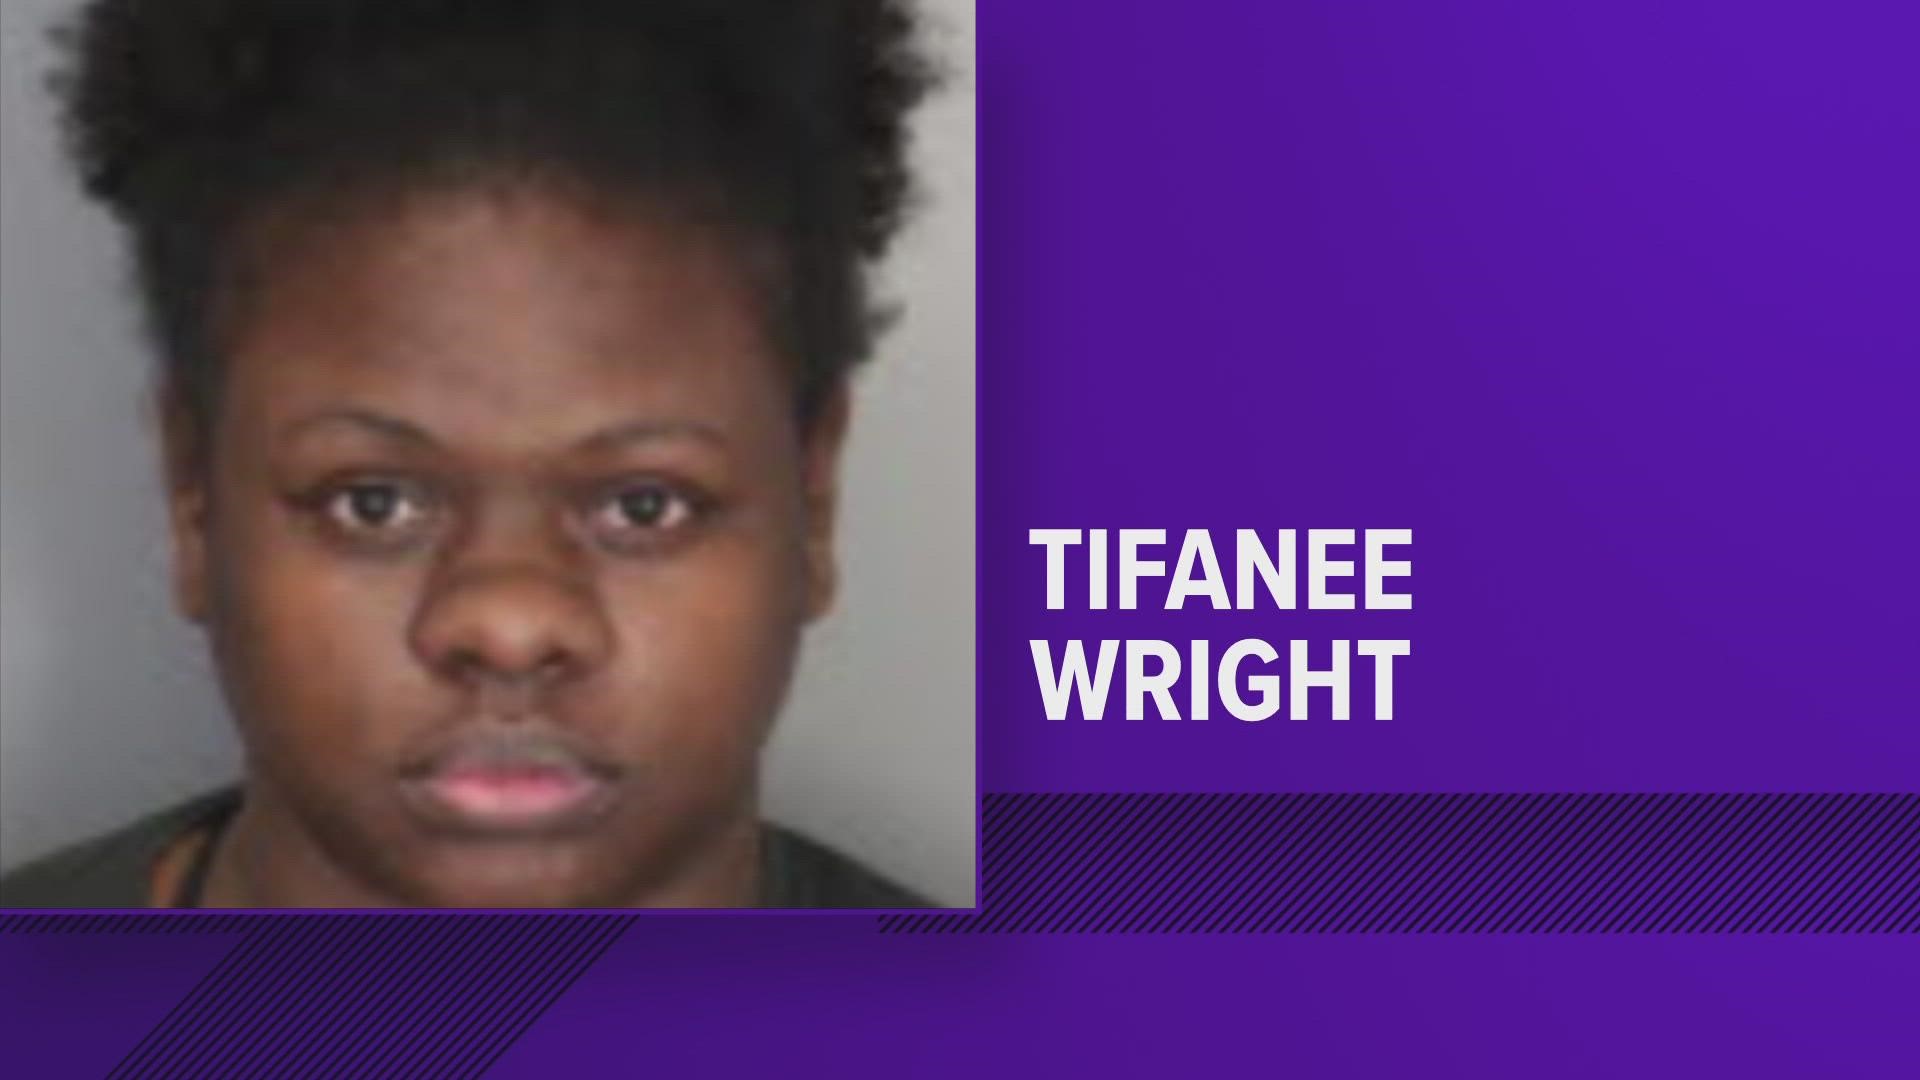 The U.S. Marshals said Tifanee Wright was arrested Tuesday morning without incident. She is charged with second-degree murder in the death of Dr. Yvonne Nelson.